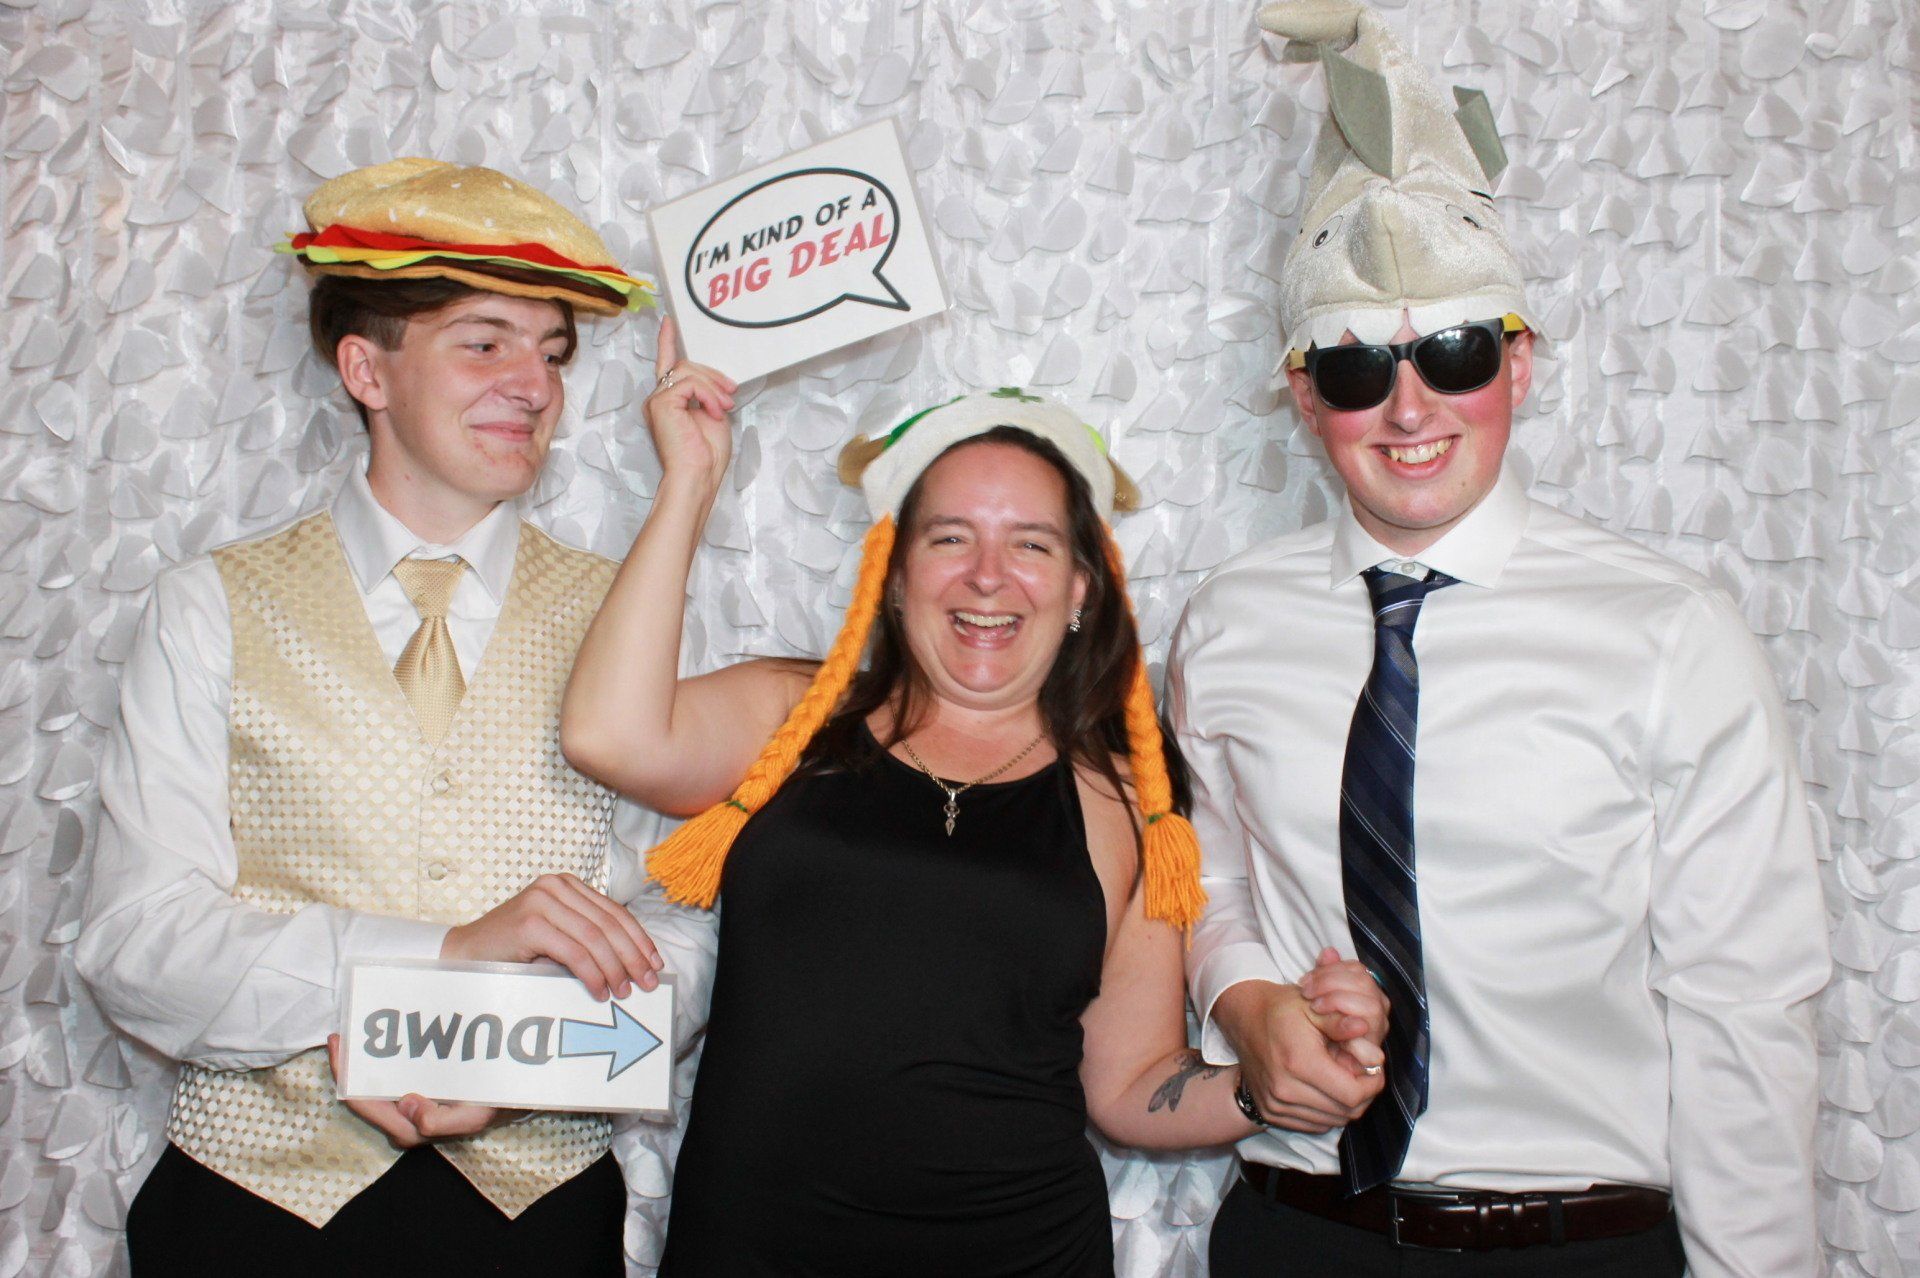 photo booth rental maine at Regatta Room Banquet & Conference Center, Eliot, Maine